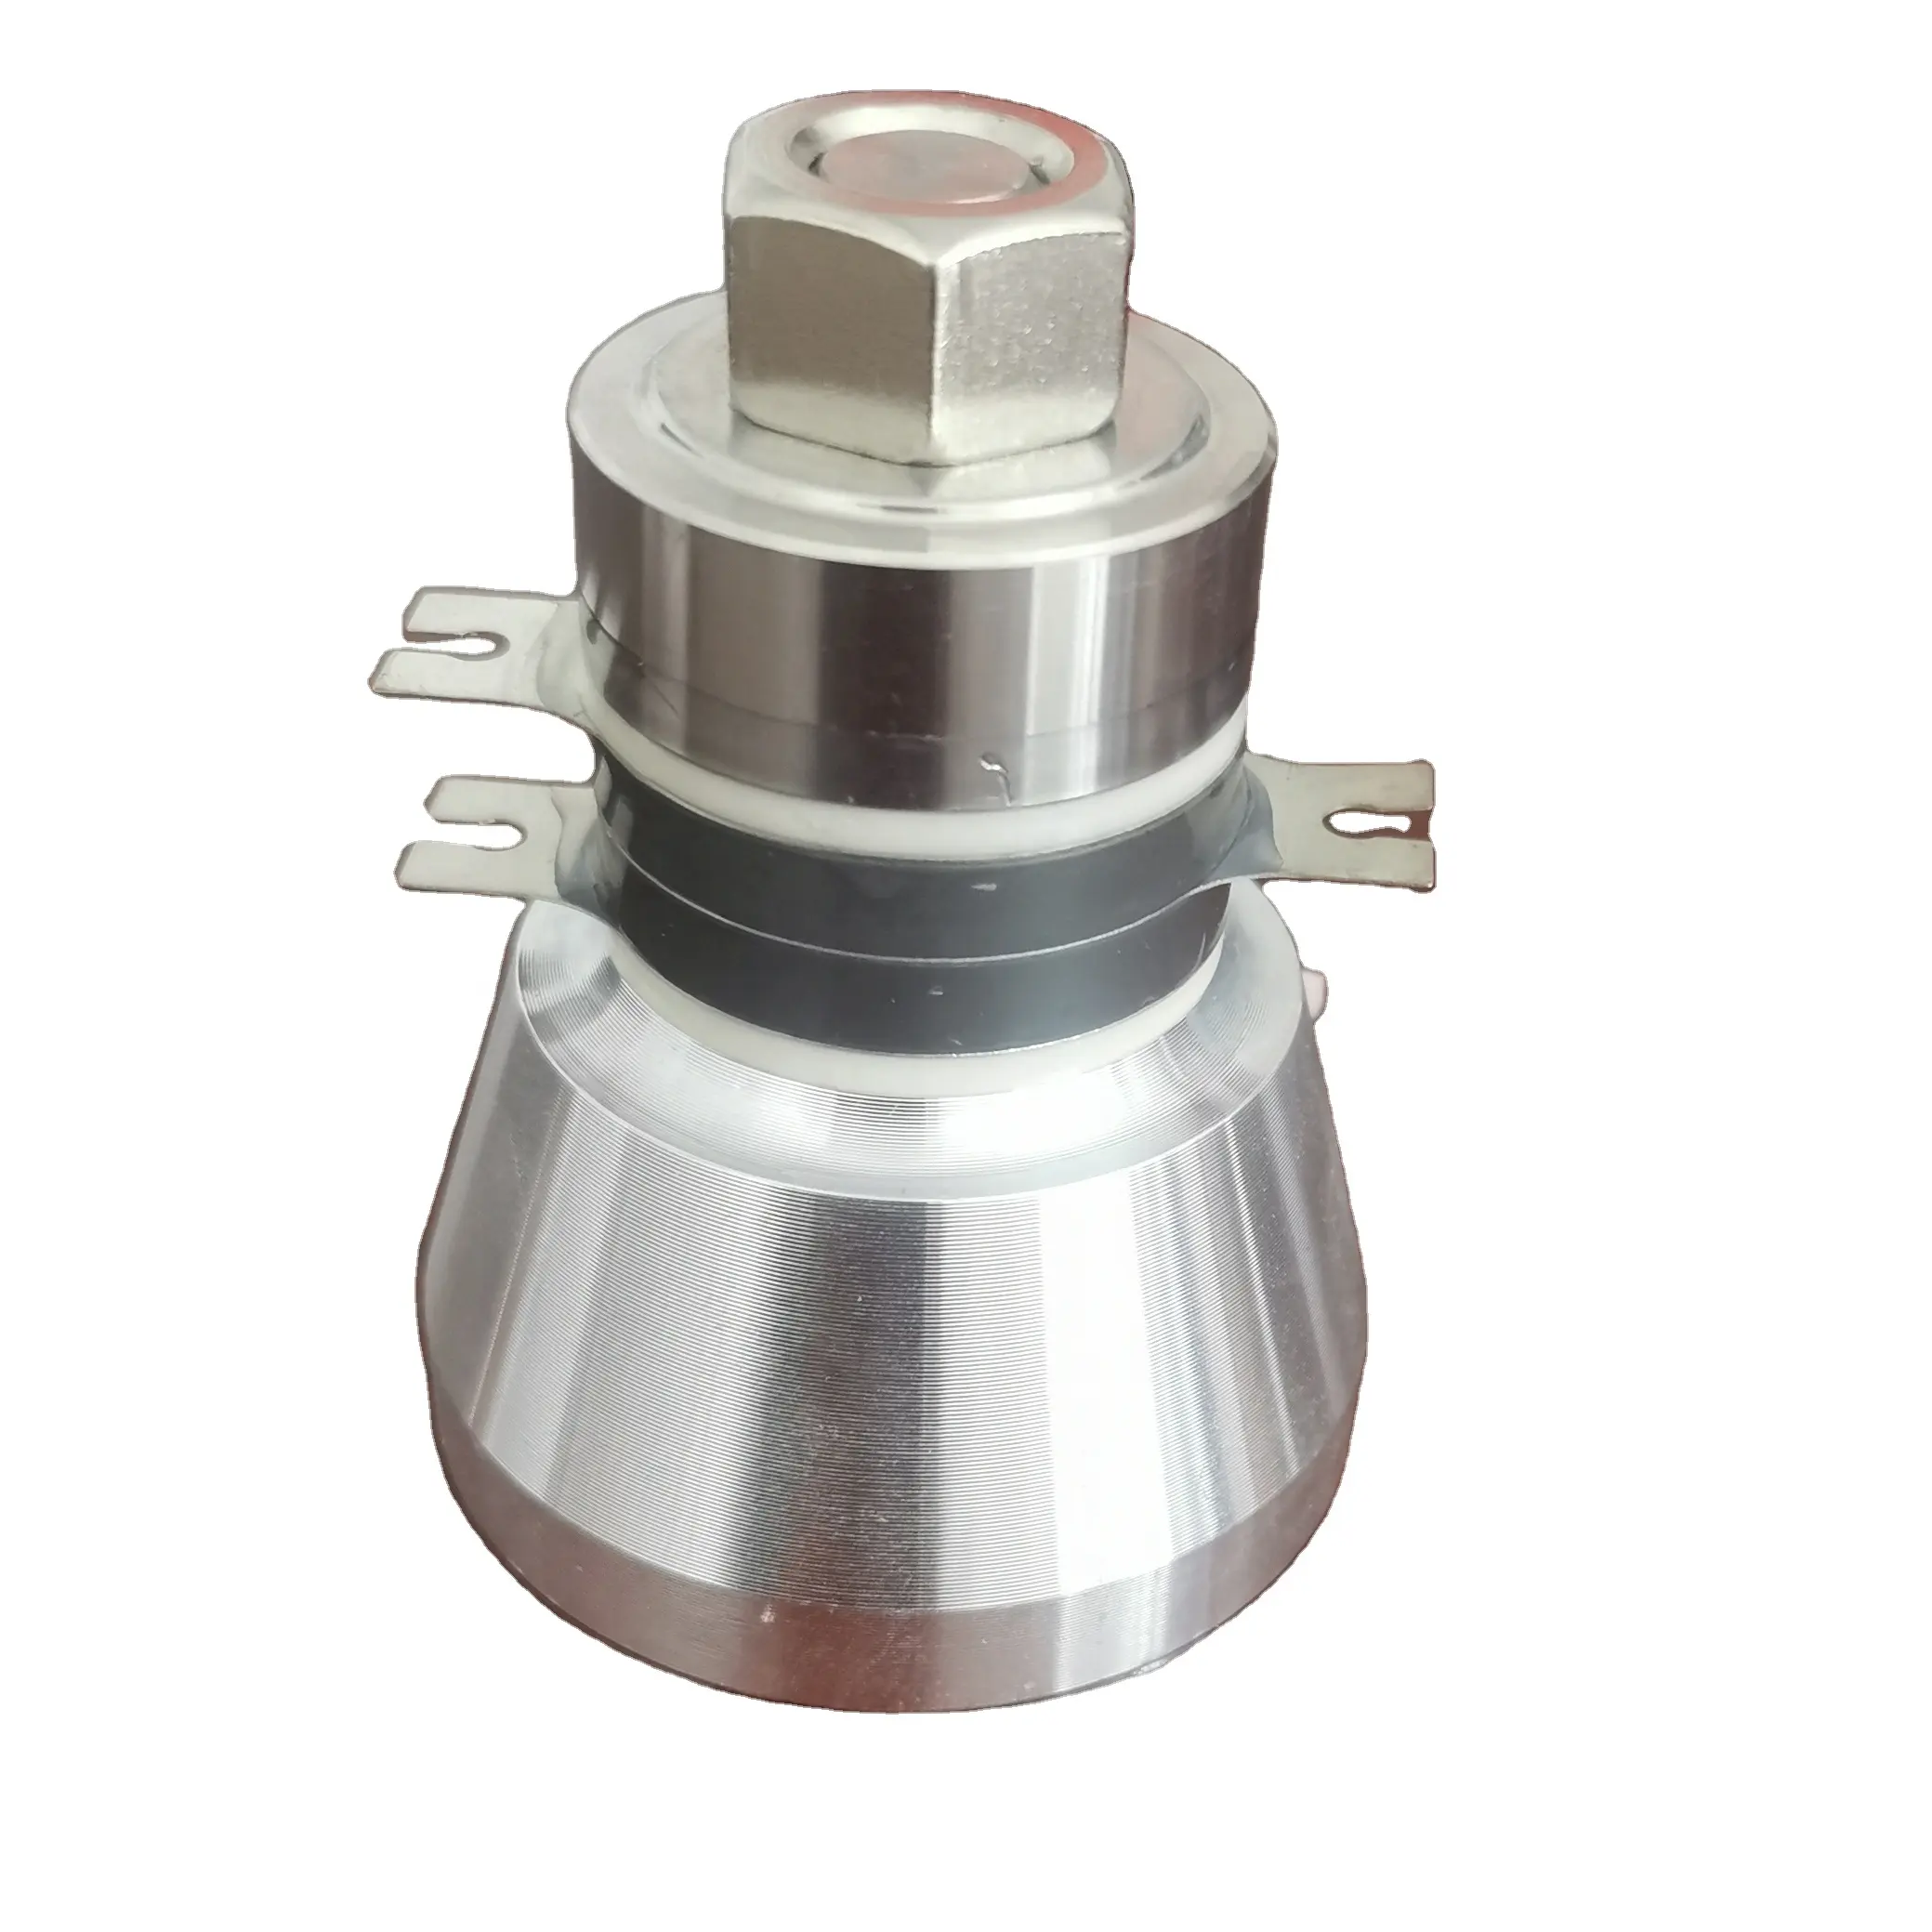 BILL Factory Sales Ultrasonic Oscillator 50w 28khz Ultrasonic Cleaning Transducer With Insulation Disc